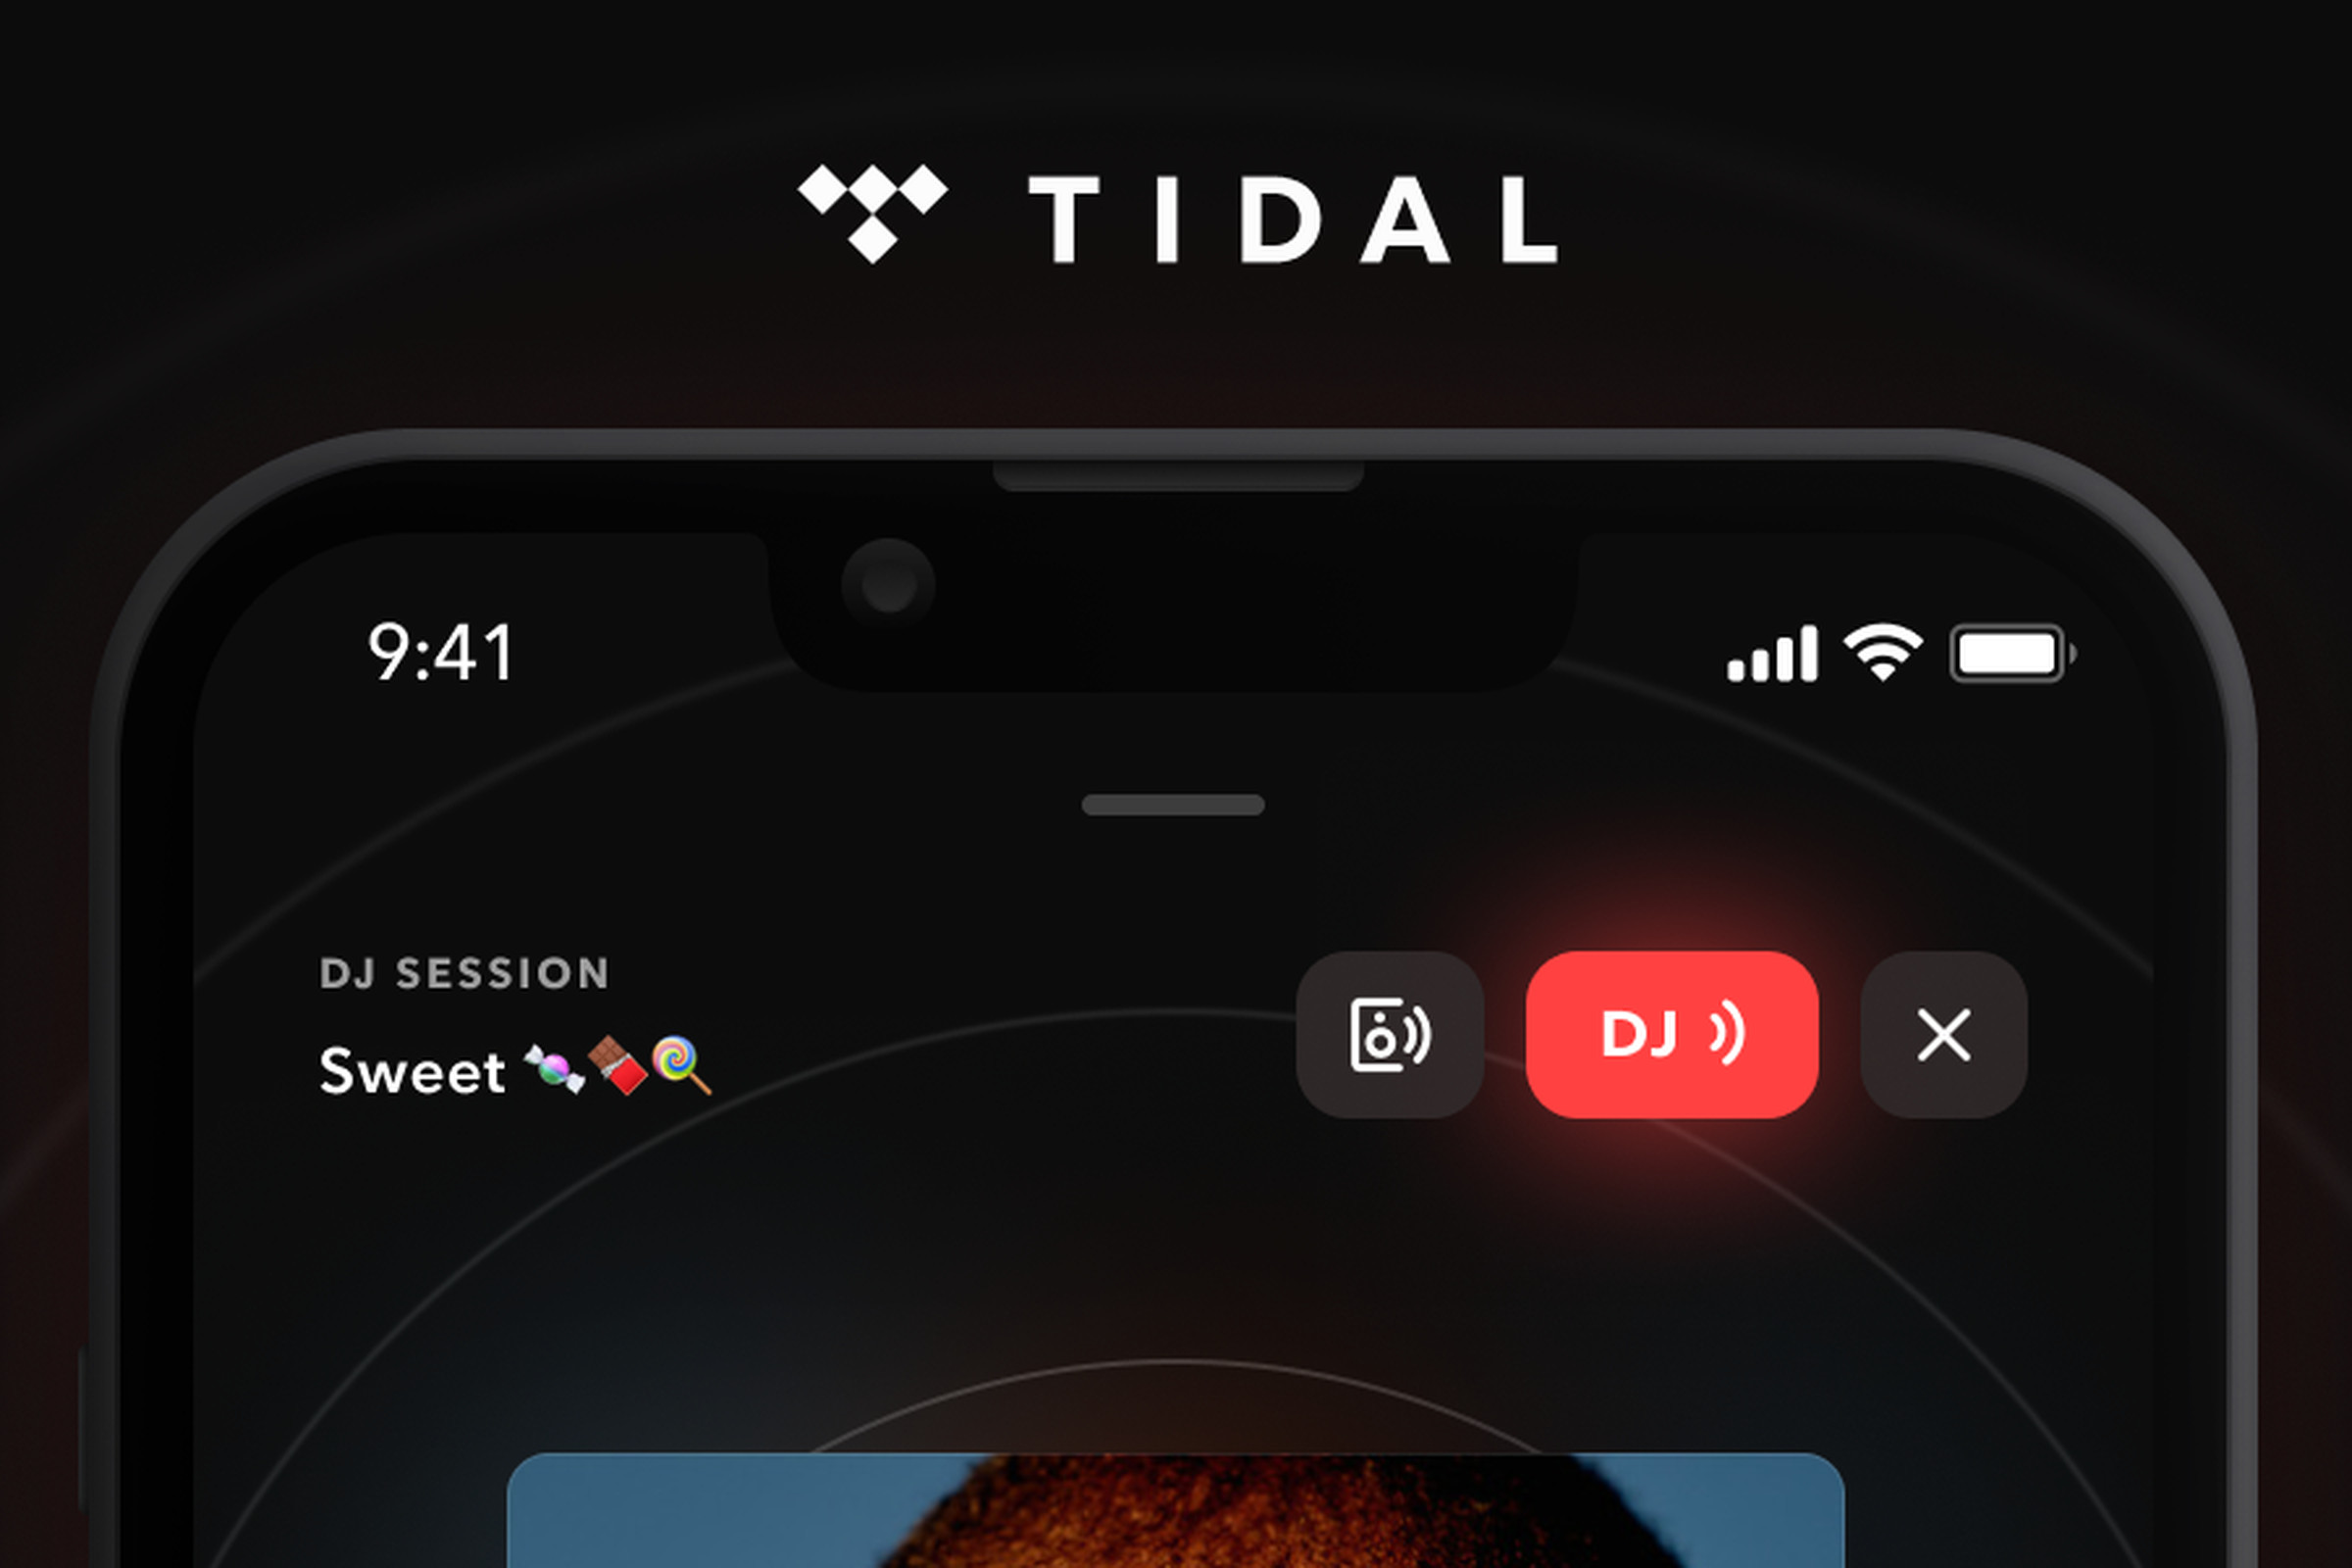 The tidal logo is situated above the top third of an iPhone screen with the Tidal app that says “DJ Session” with a playlist called “sweet” and a red DJ icon on the right next to the AirPlay/wireless connect button.